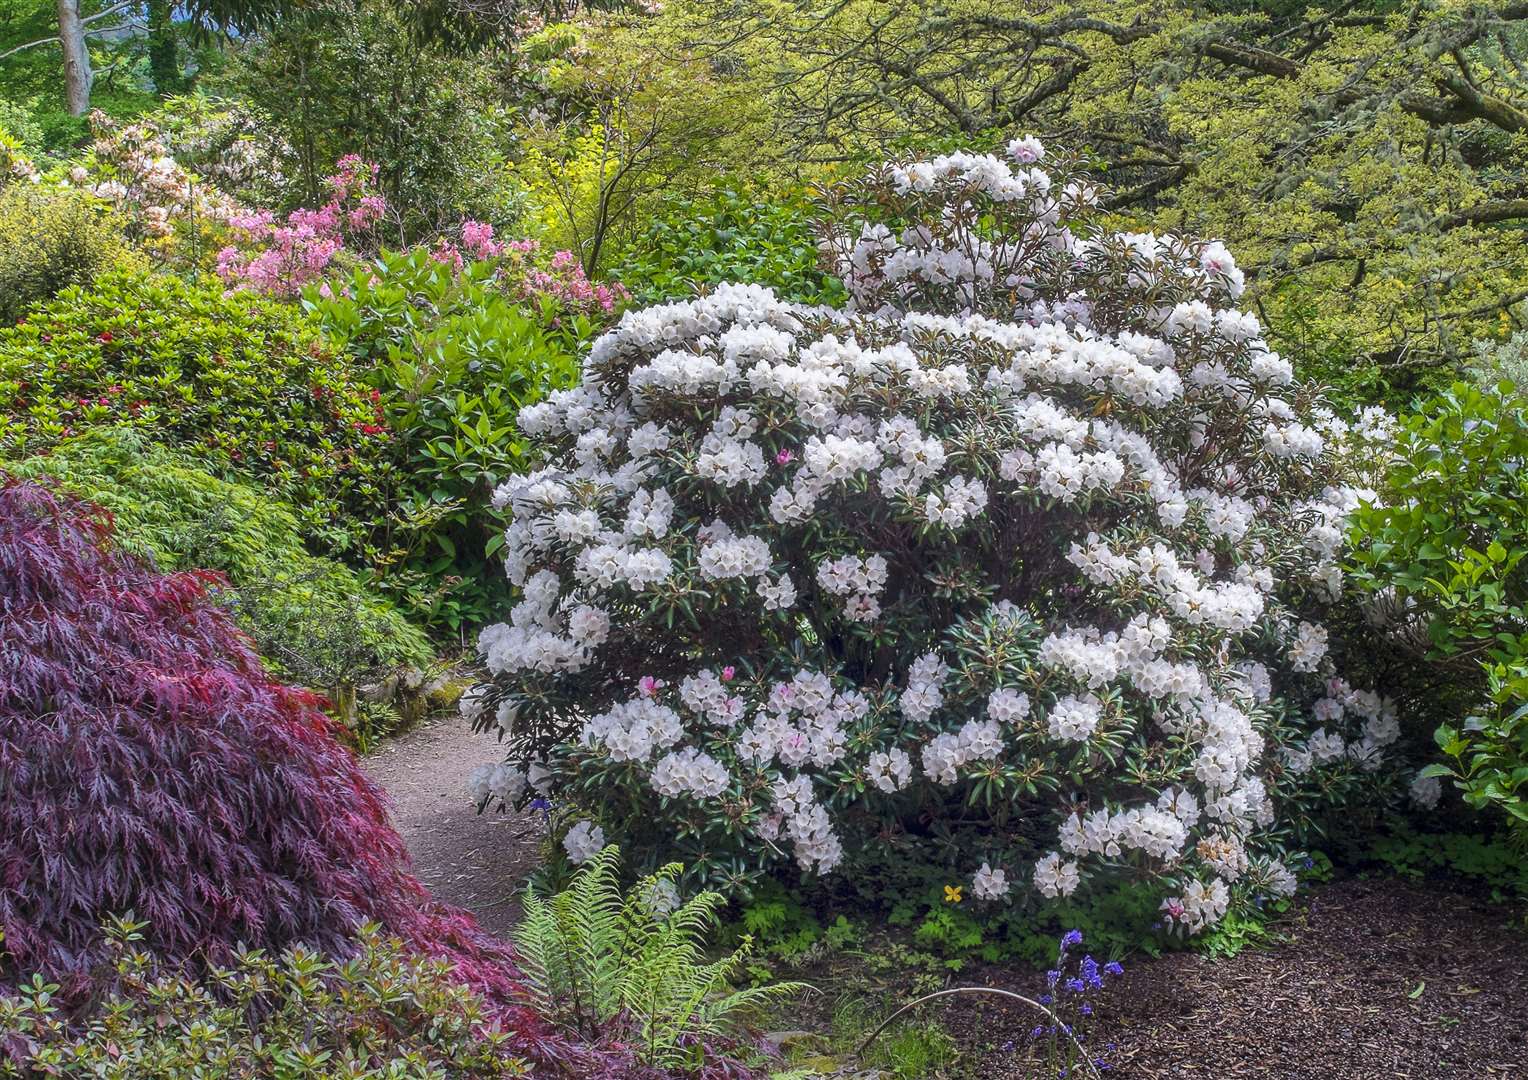 Rhododendrons at Inverewe. Photo: Alan Hendry